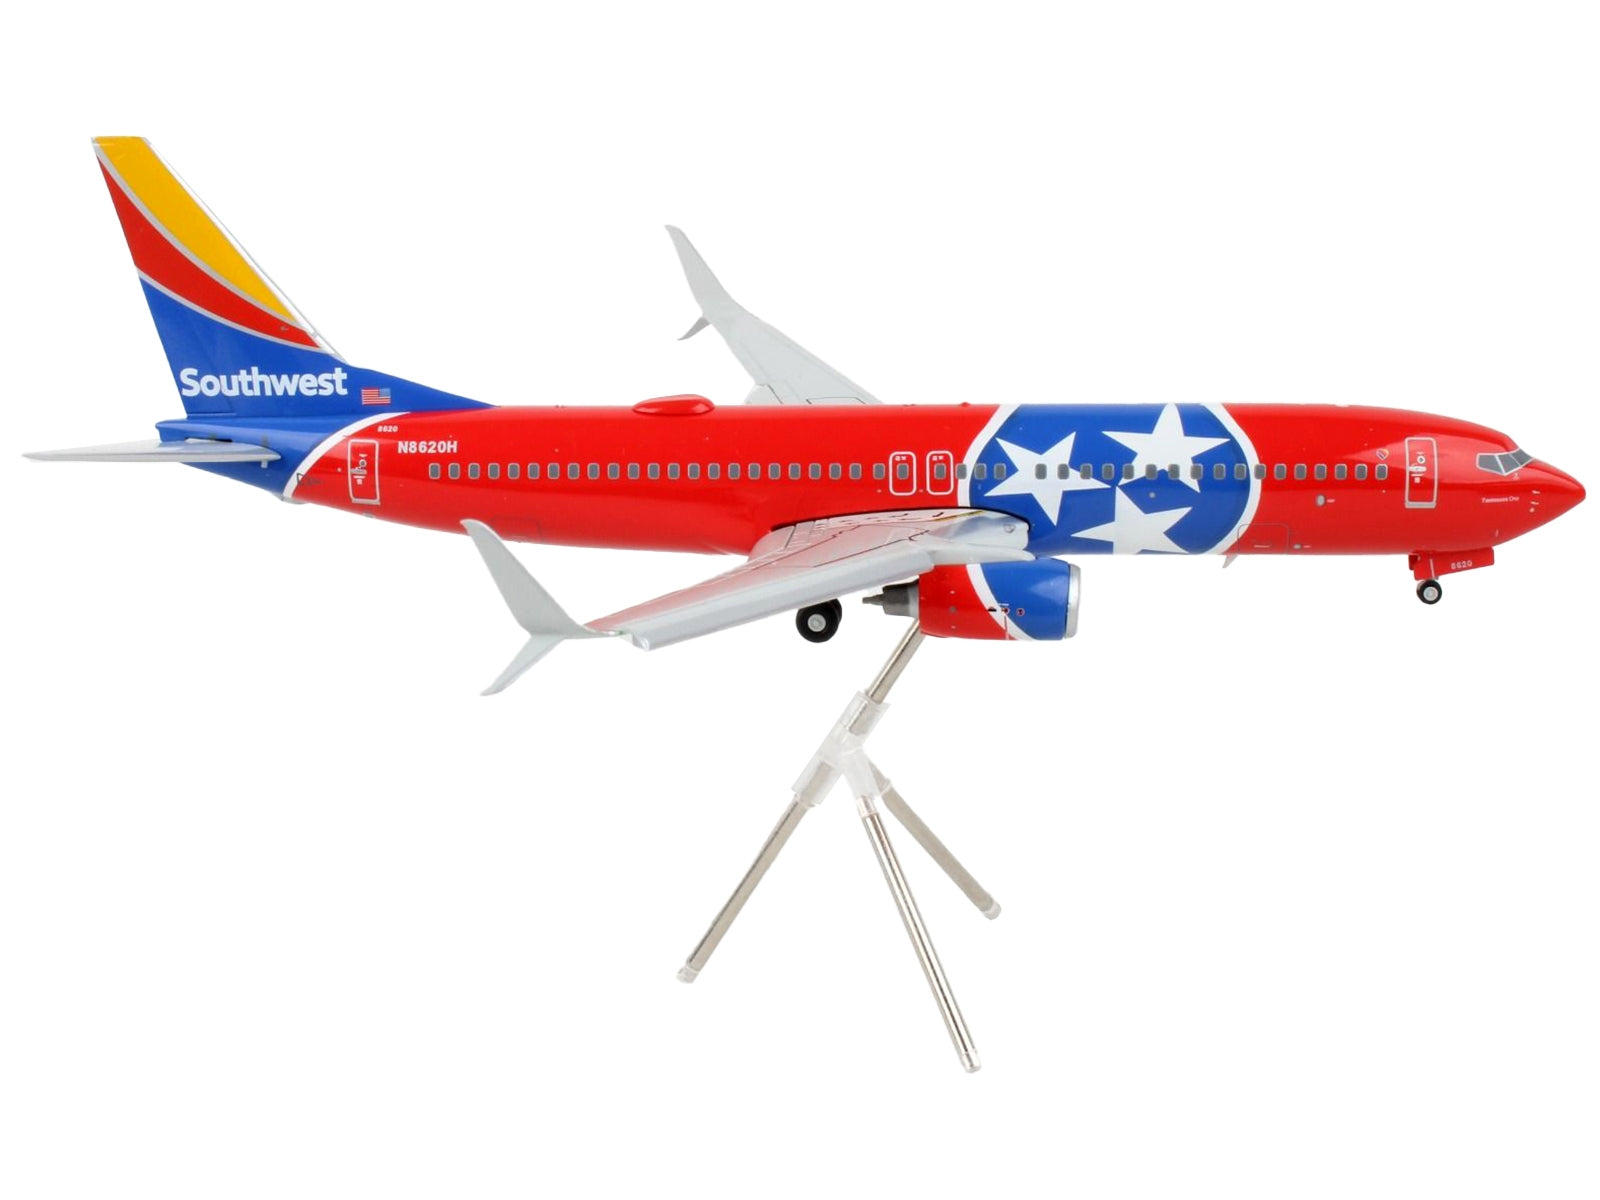 GeminiJets 1/200 Diecast: Boeing 737-800 "Southwest Airlines - Tennessee One" with Flaps Down, Tennessee Flag Livery